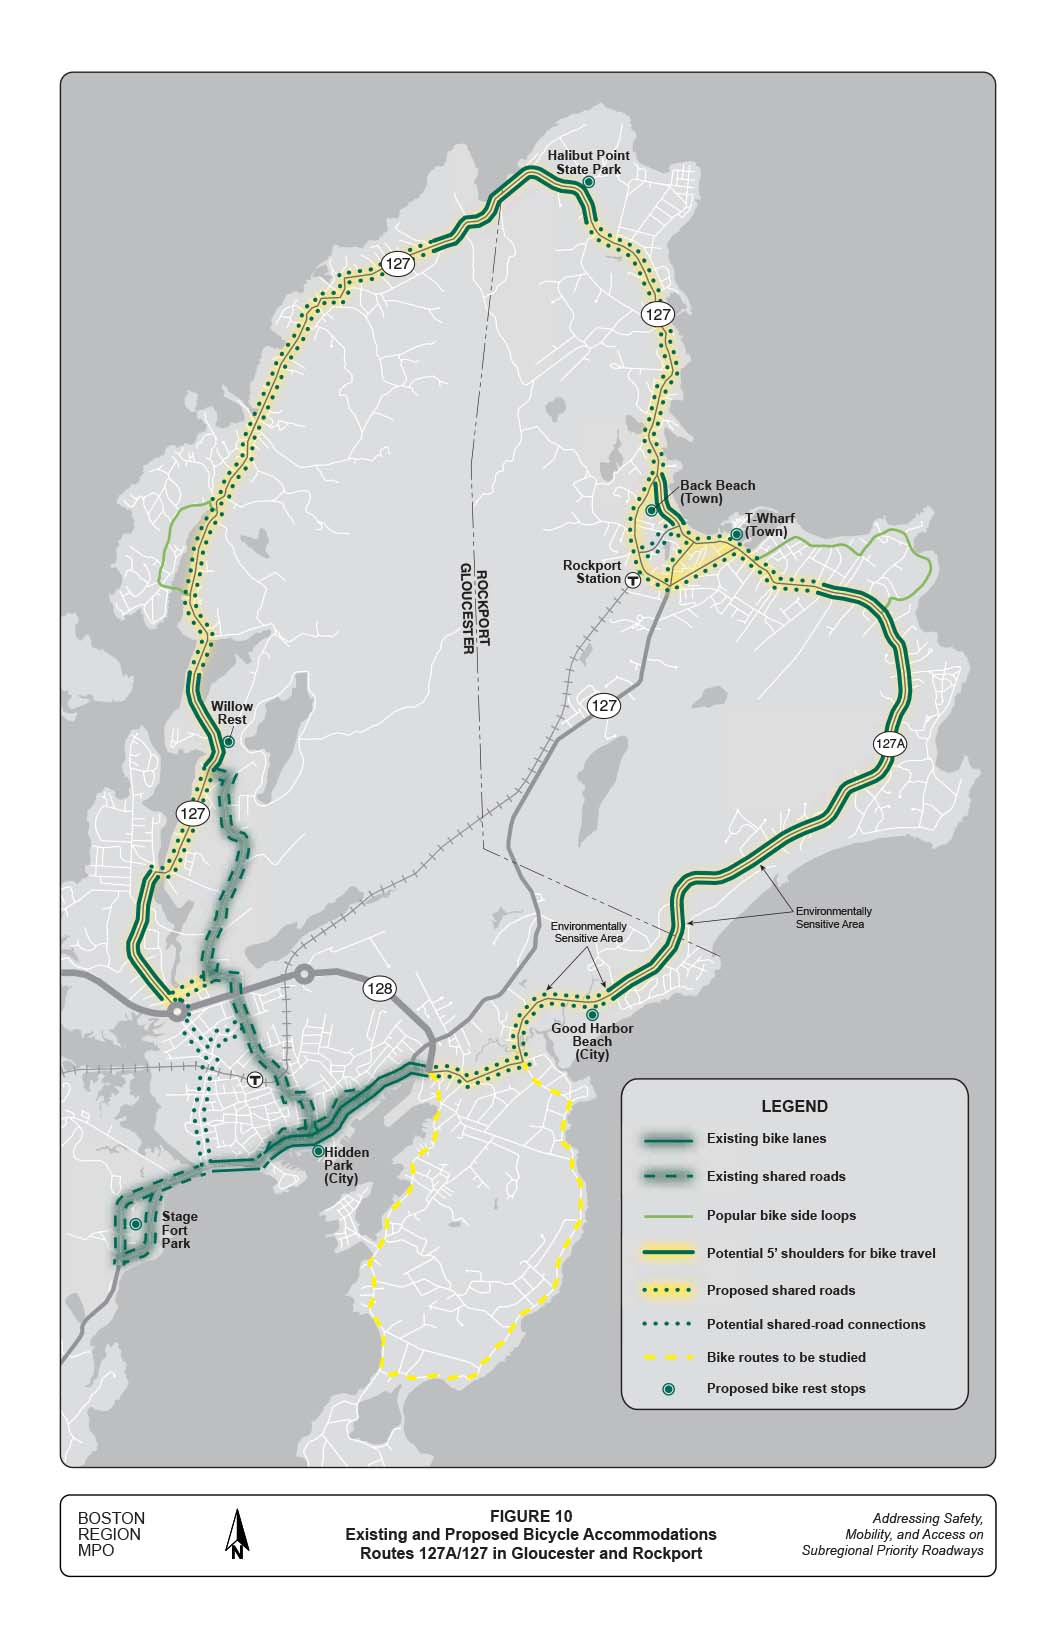 FIGURE 10. Existing and Proposed Bicycle Accommodations Routes 127A/127 in Gloucester and Rockport
Figure 9 is a black-and-white map with superimposed colors that denote the following: Green line with gray shadow = existing bike lanes; dashed green line with gray shadow = existing shared roads; light green thin line = popular bike side loops; green line with yellow shadow = potential 5’ shoulders for bike travel; dotted green line with yellow shadow = proposed shared roads; dotted green line = potential shared-road connections; dashed yellow line = bike routes to be studied; and green bulls eye = proposed bike rest stops.
